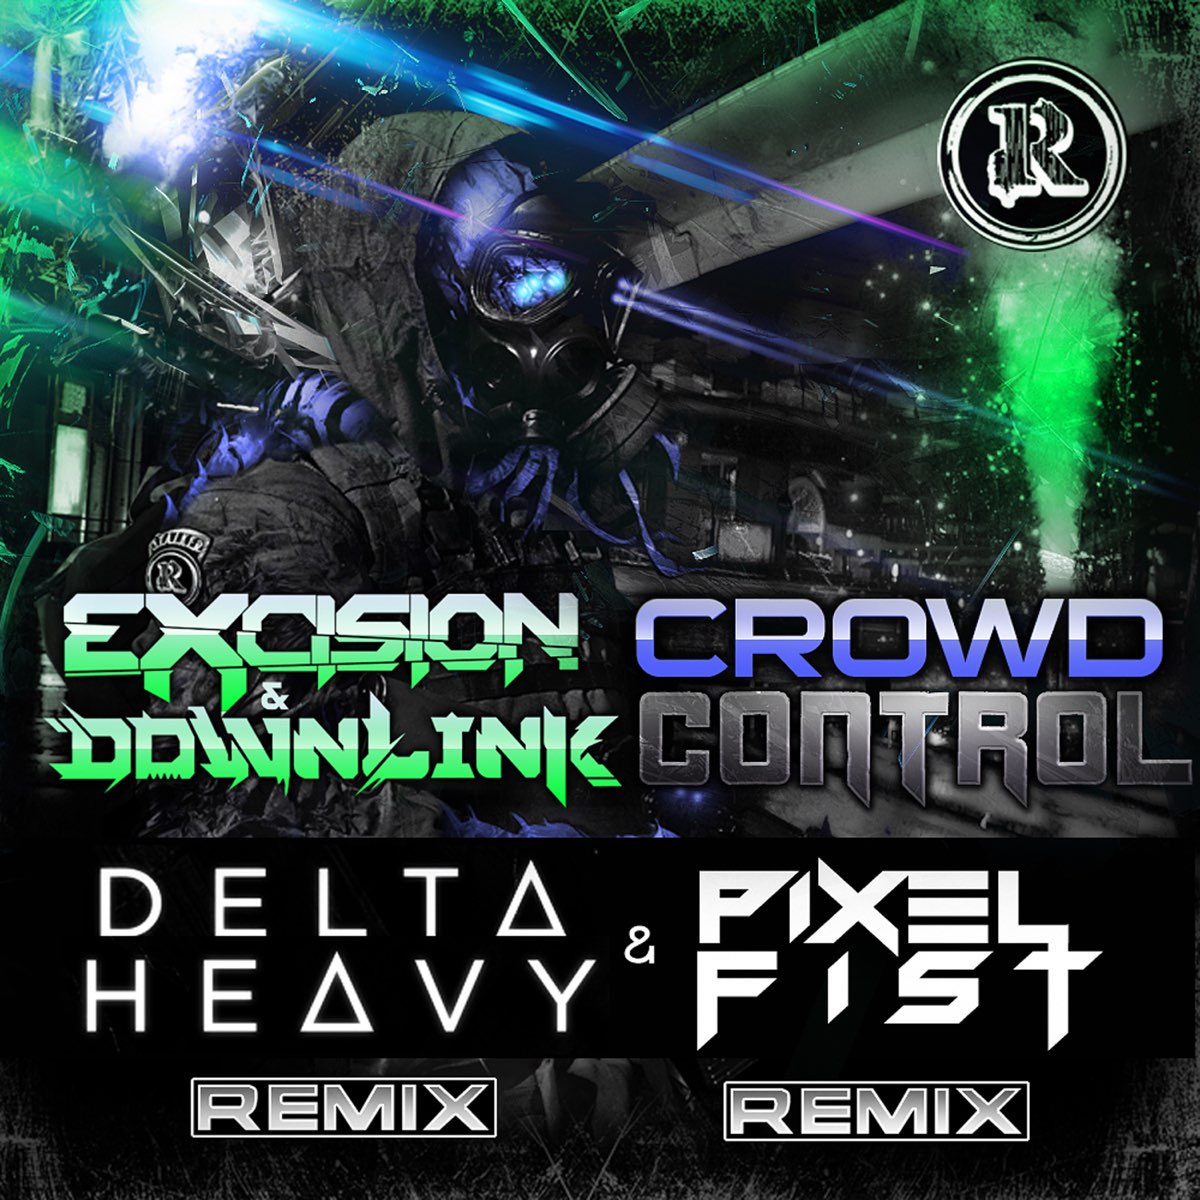 Excision and Downlink. Crowd Control. Downlink обложки. Crowd Control Band#. Control ремикс